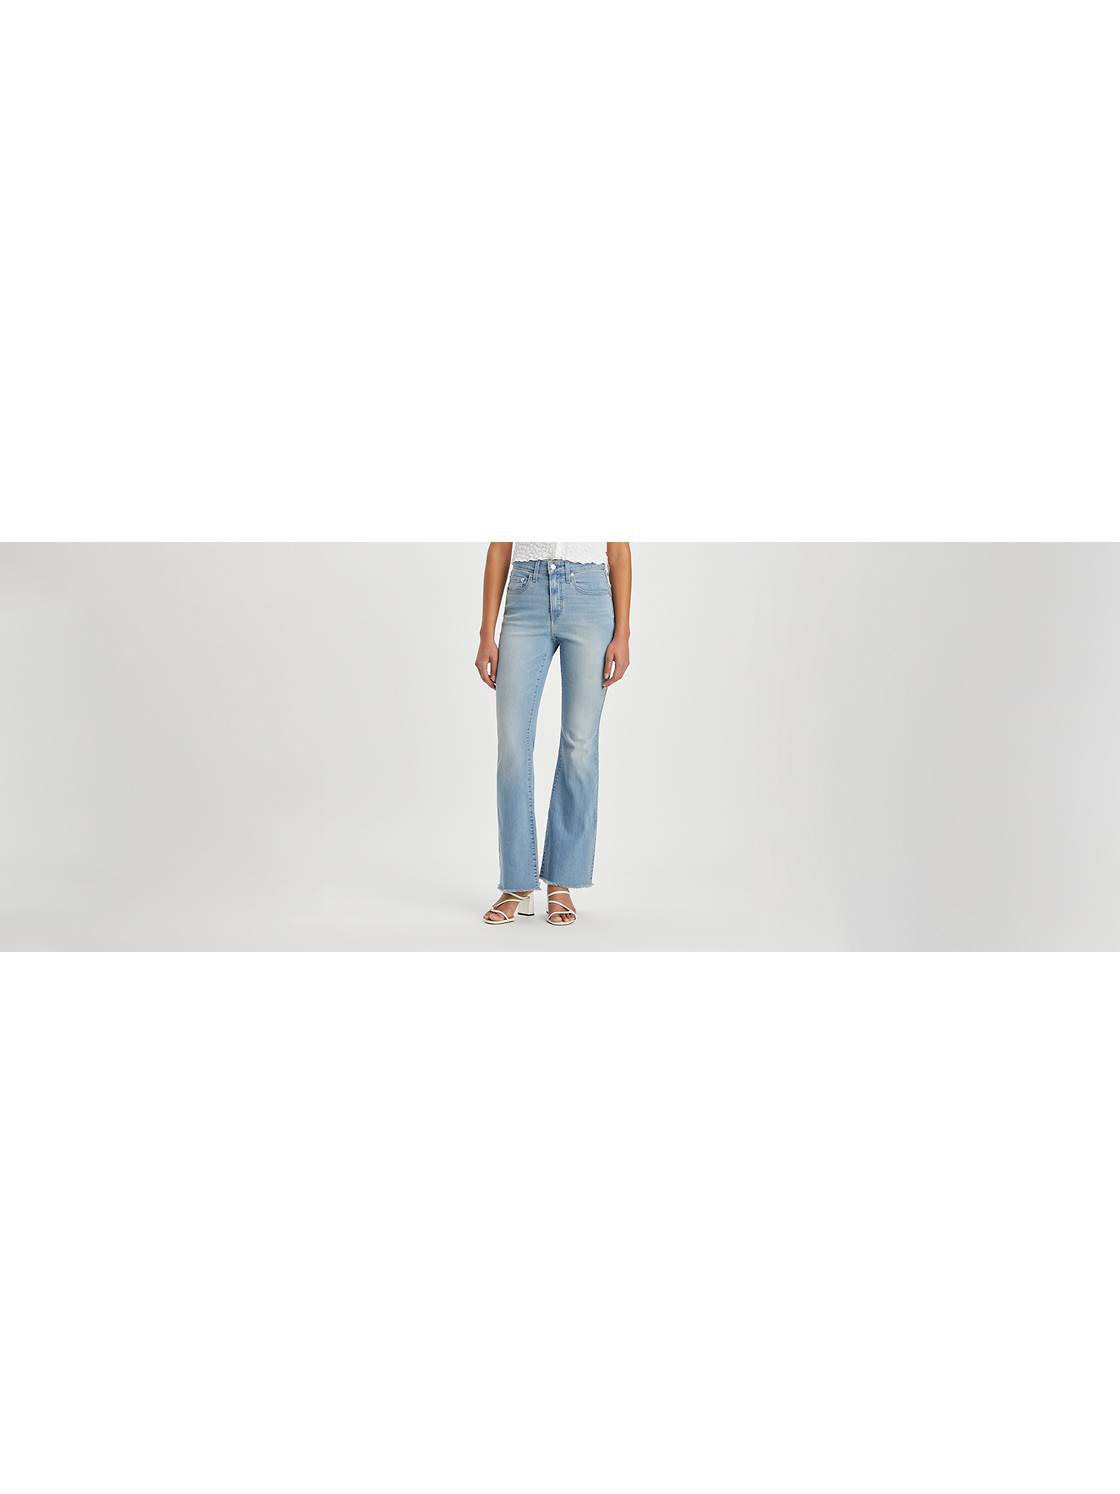 Buy Pantete Womens High Waisted Bell Bottom Jeans Denim High Rise Flare Jean  Pant with Wide Leg and Belt at